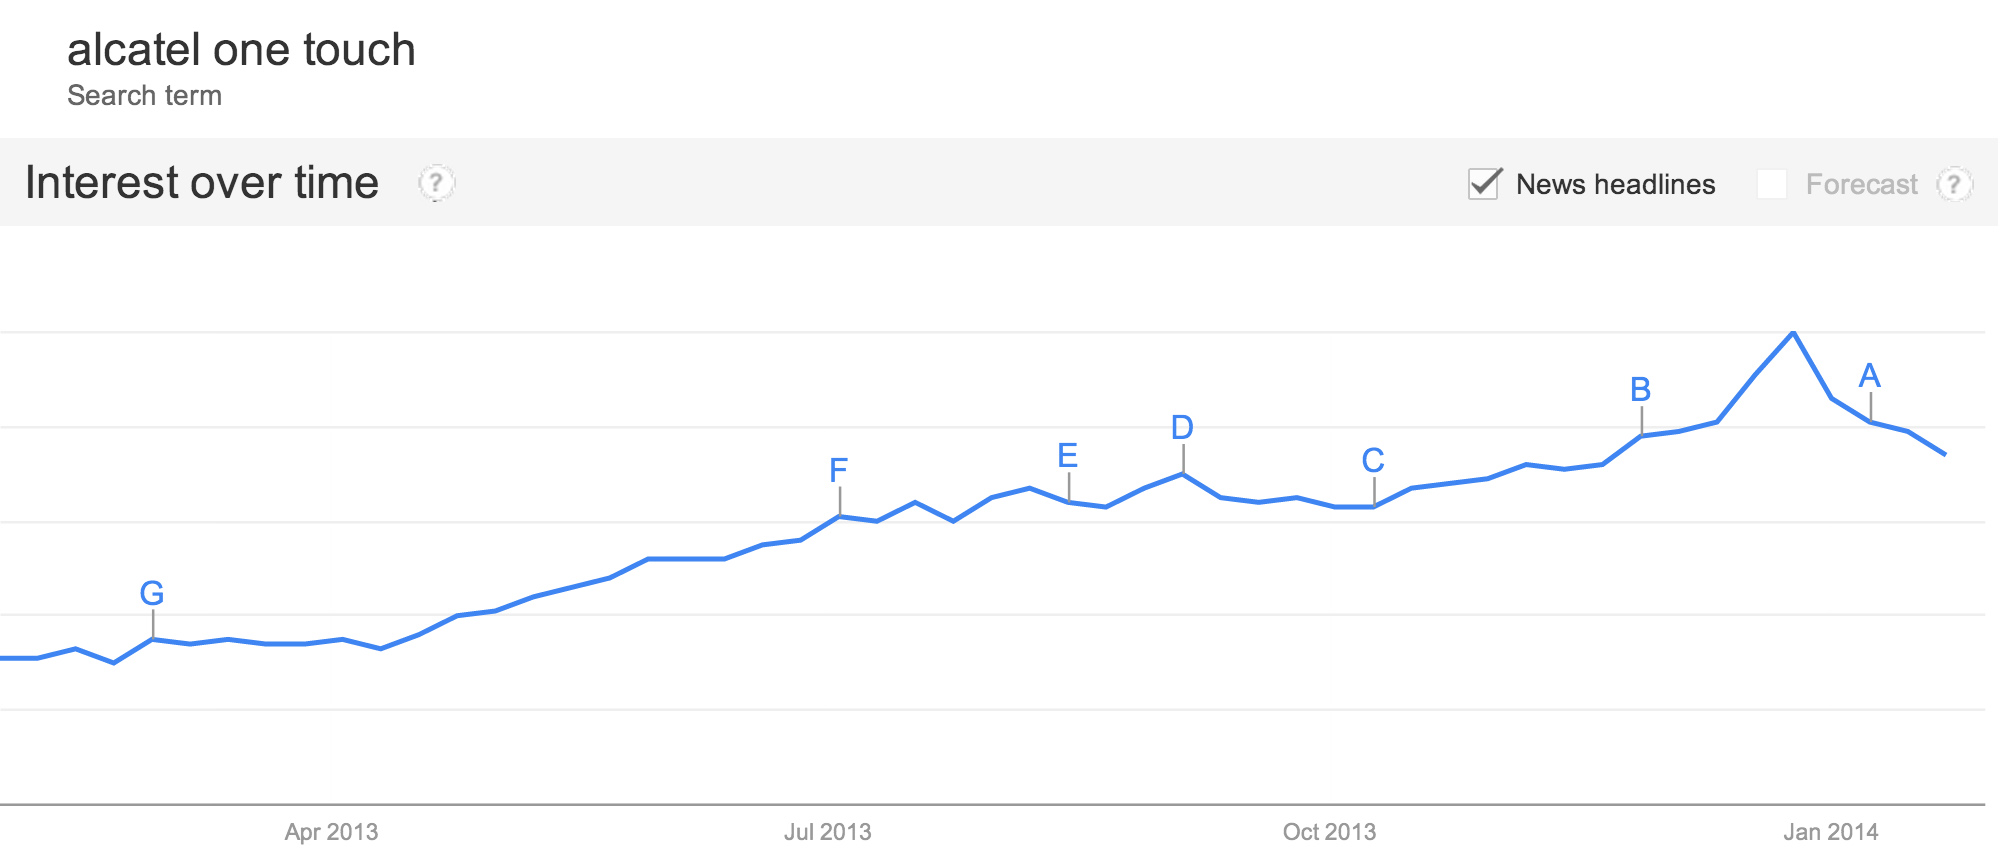 Alcatel One Touch Search Growth 2014